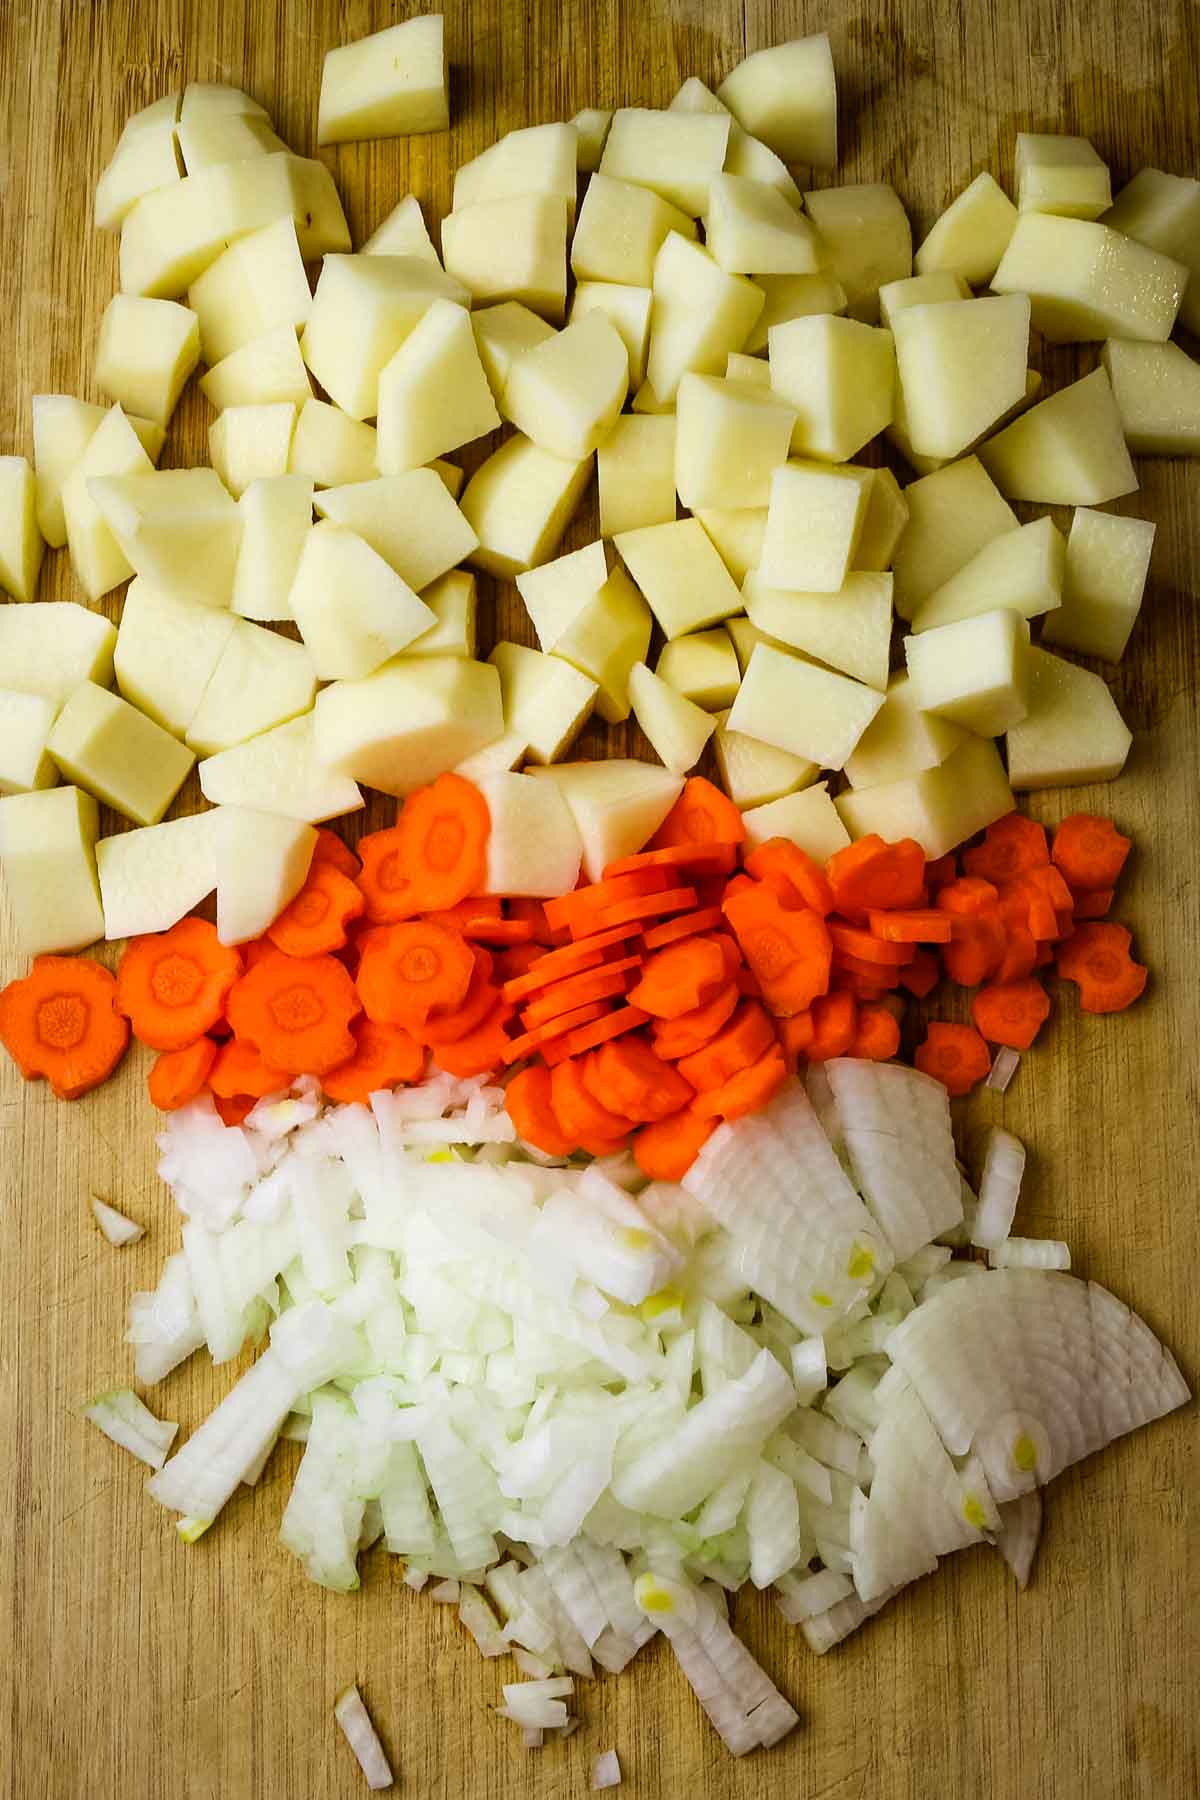 potatoes, carrots, and onions diced for shurpa soup recipe.